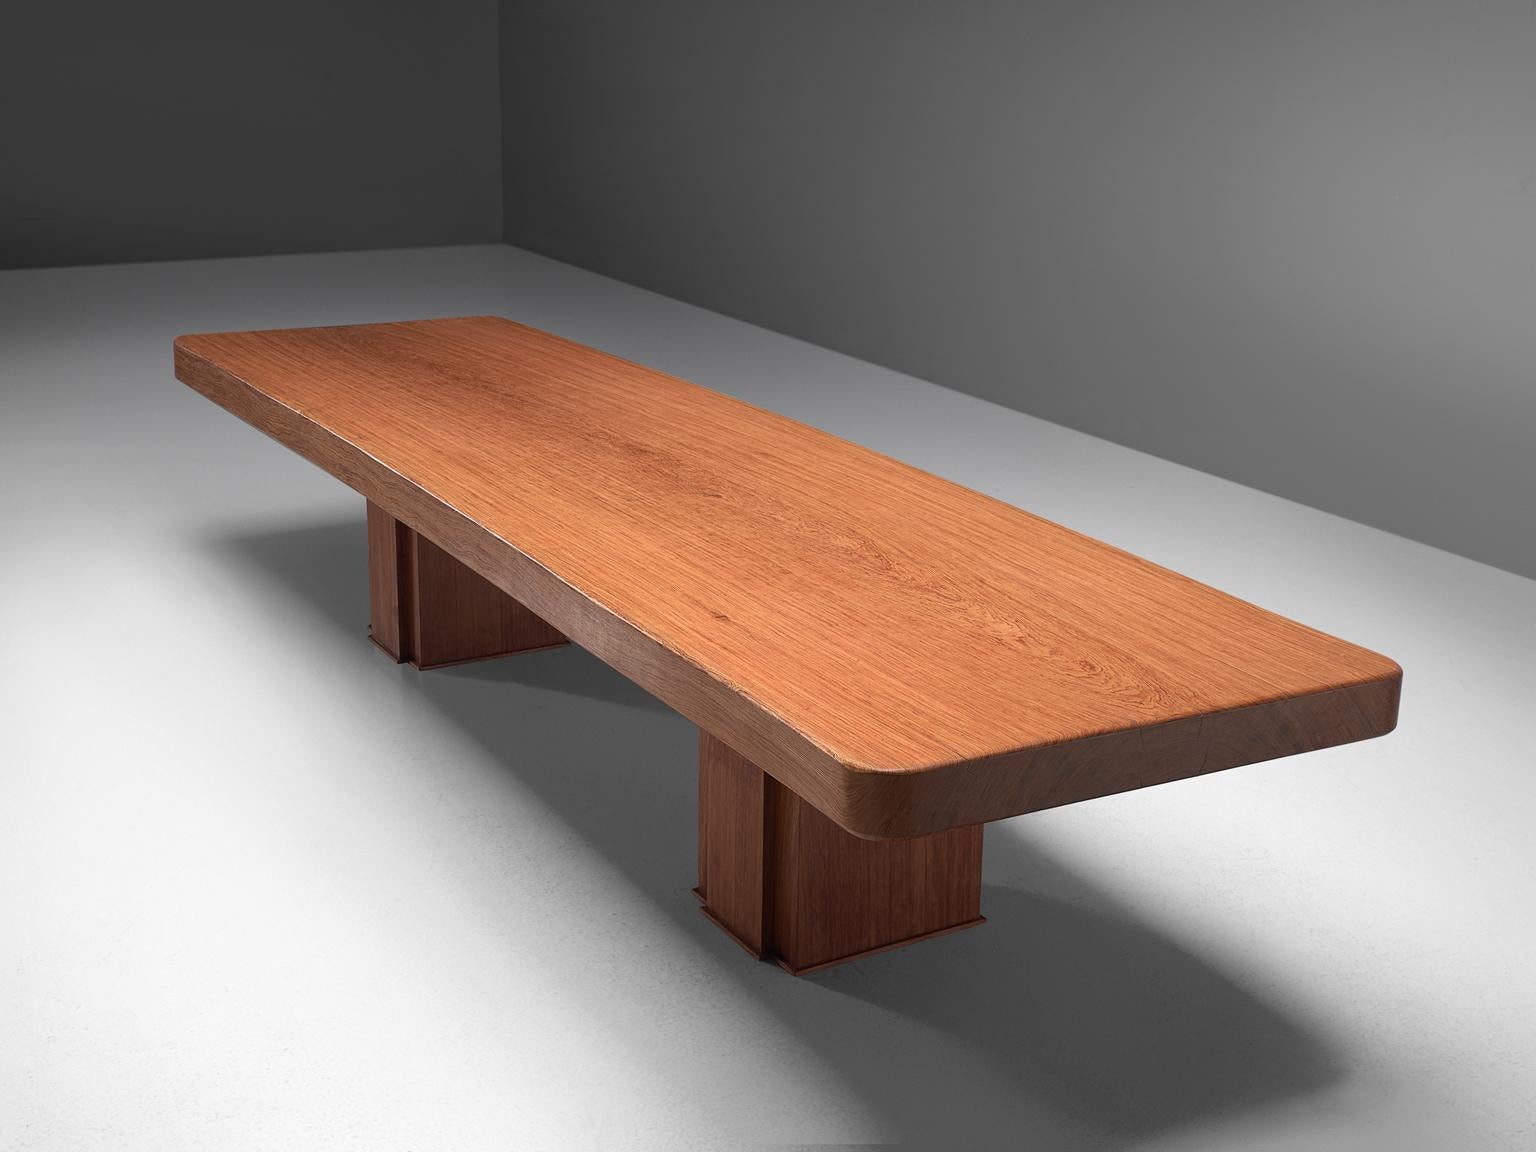 Dining table, bubinga wood, Spain, late 1960s. Measures: 4mtr/ 13ft

Grand conference table made of the rare bubinga wood. This protected African hardwood may be loved as much for its quirky name as it is for its strength and beauty. The 4 meter